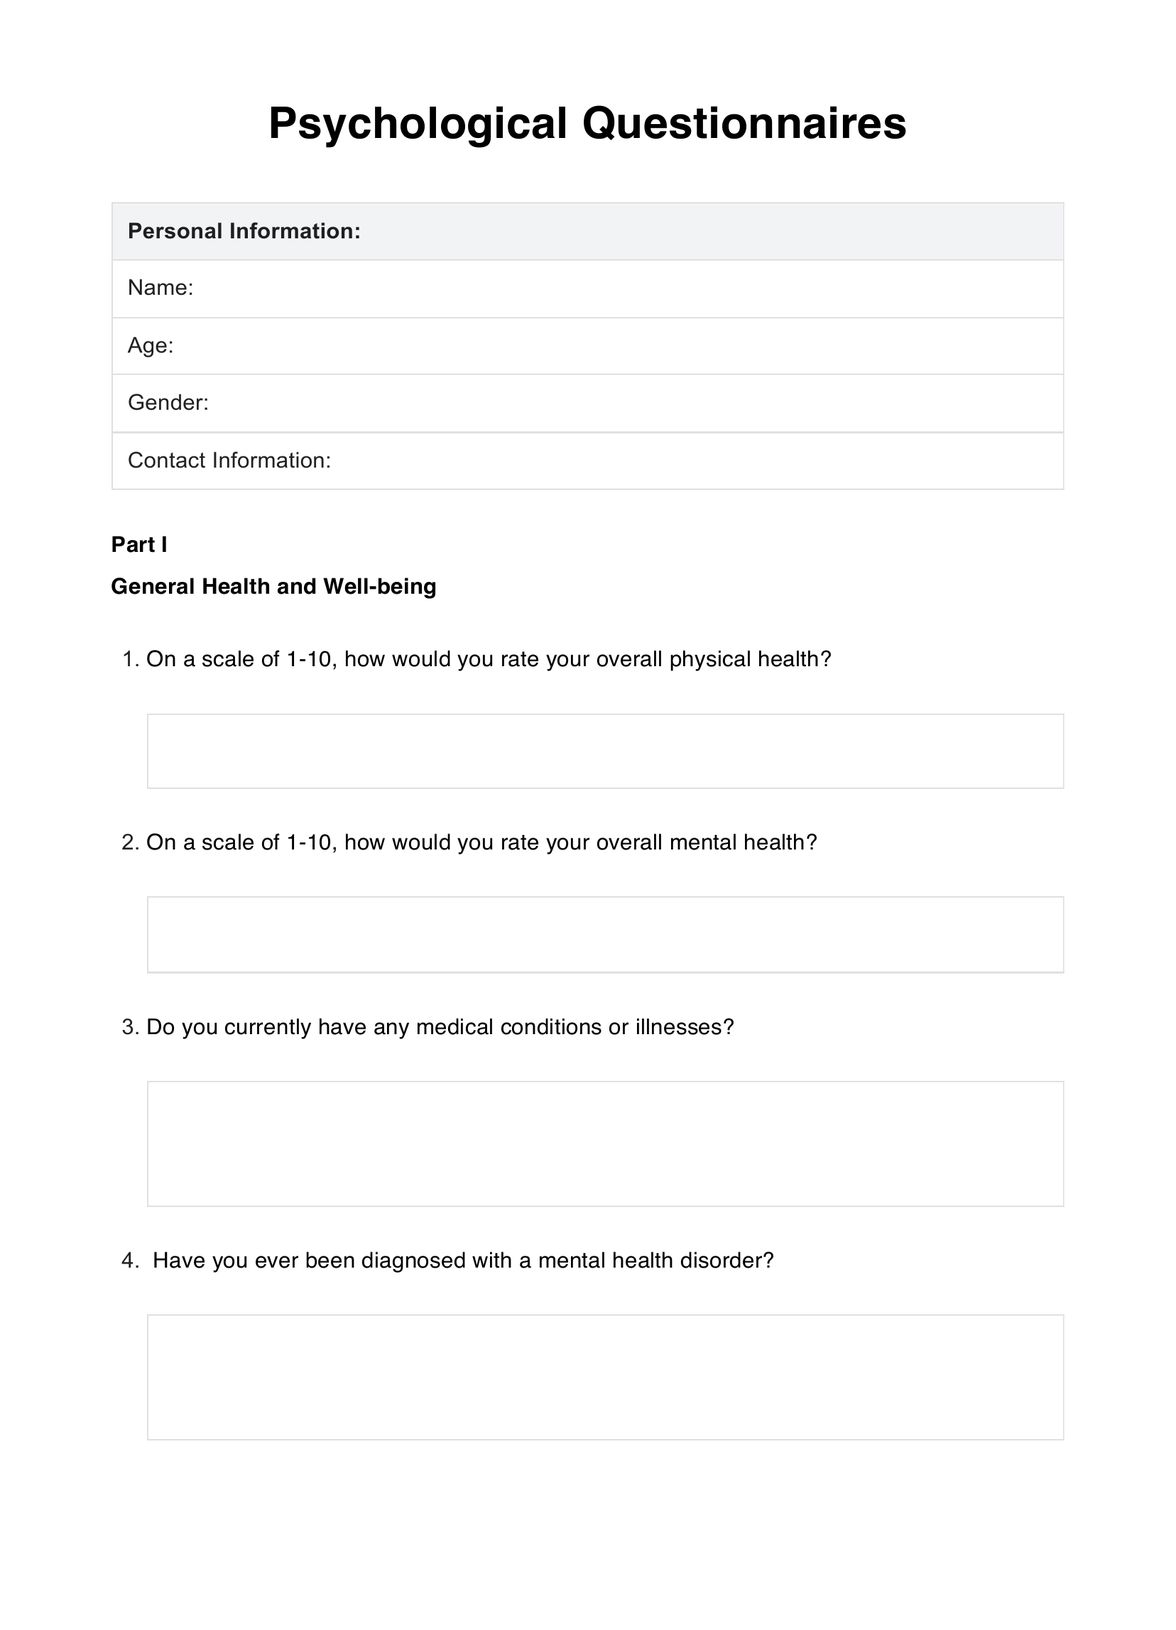 Psychological Questionnaires PDF Example